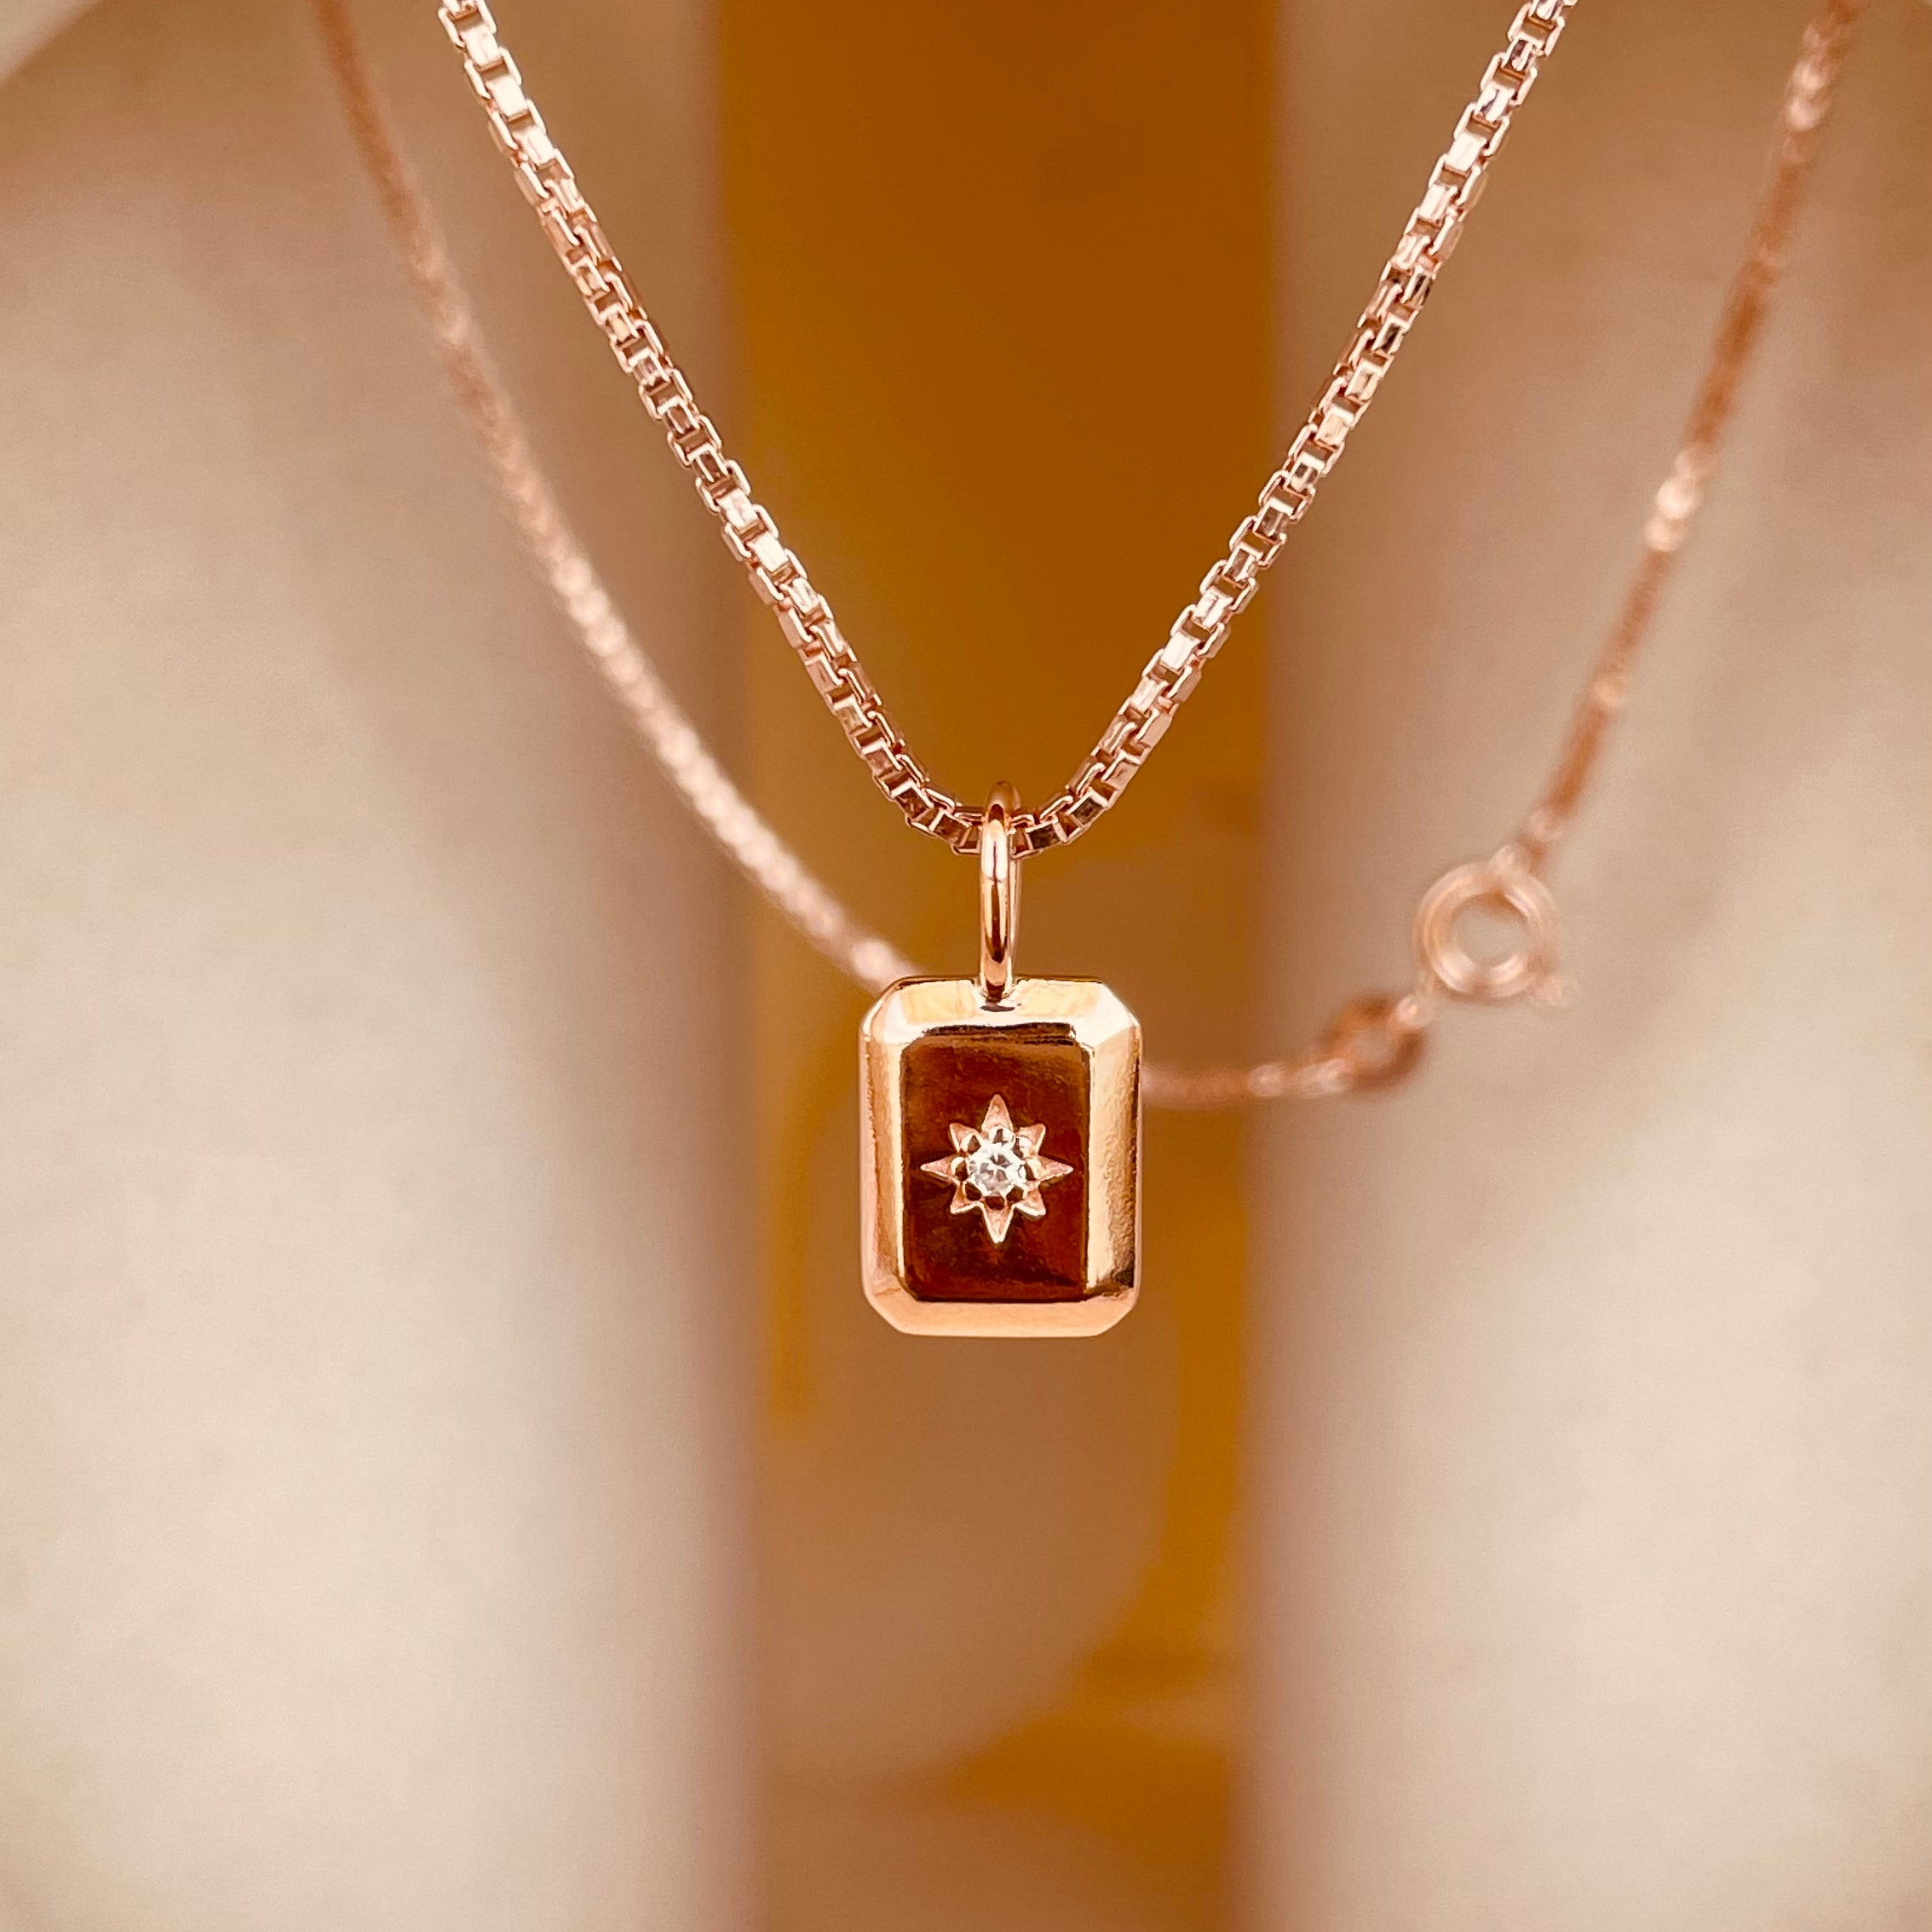 Dainty North Star Necklace with Box Chain - Octonov 